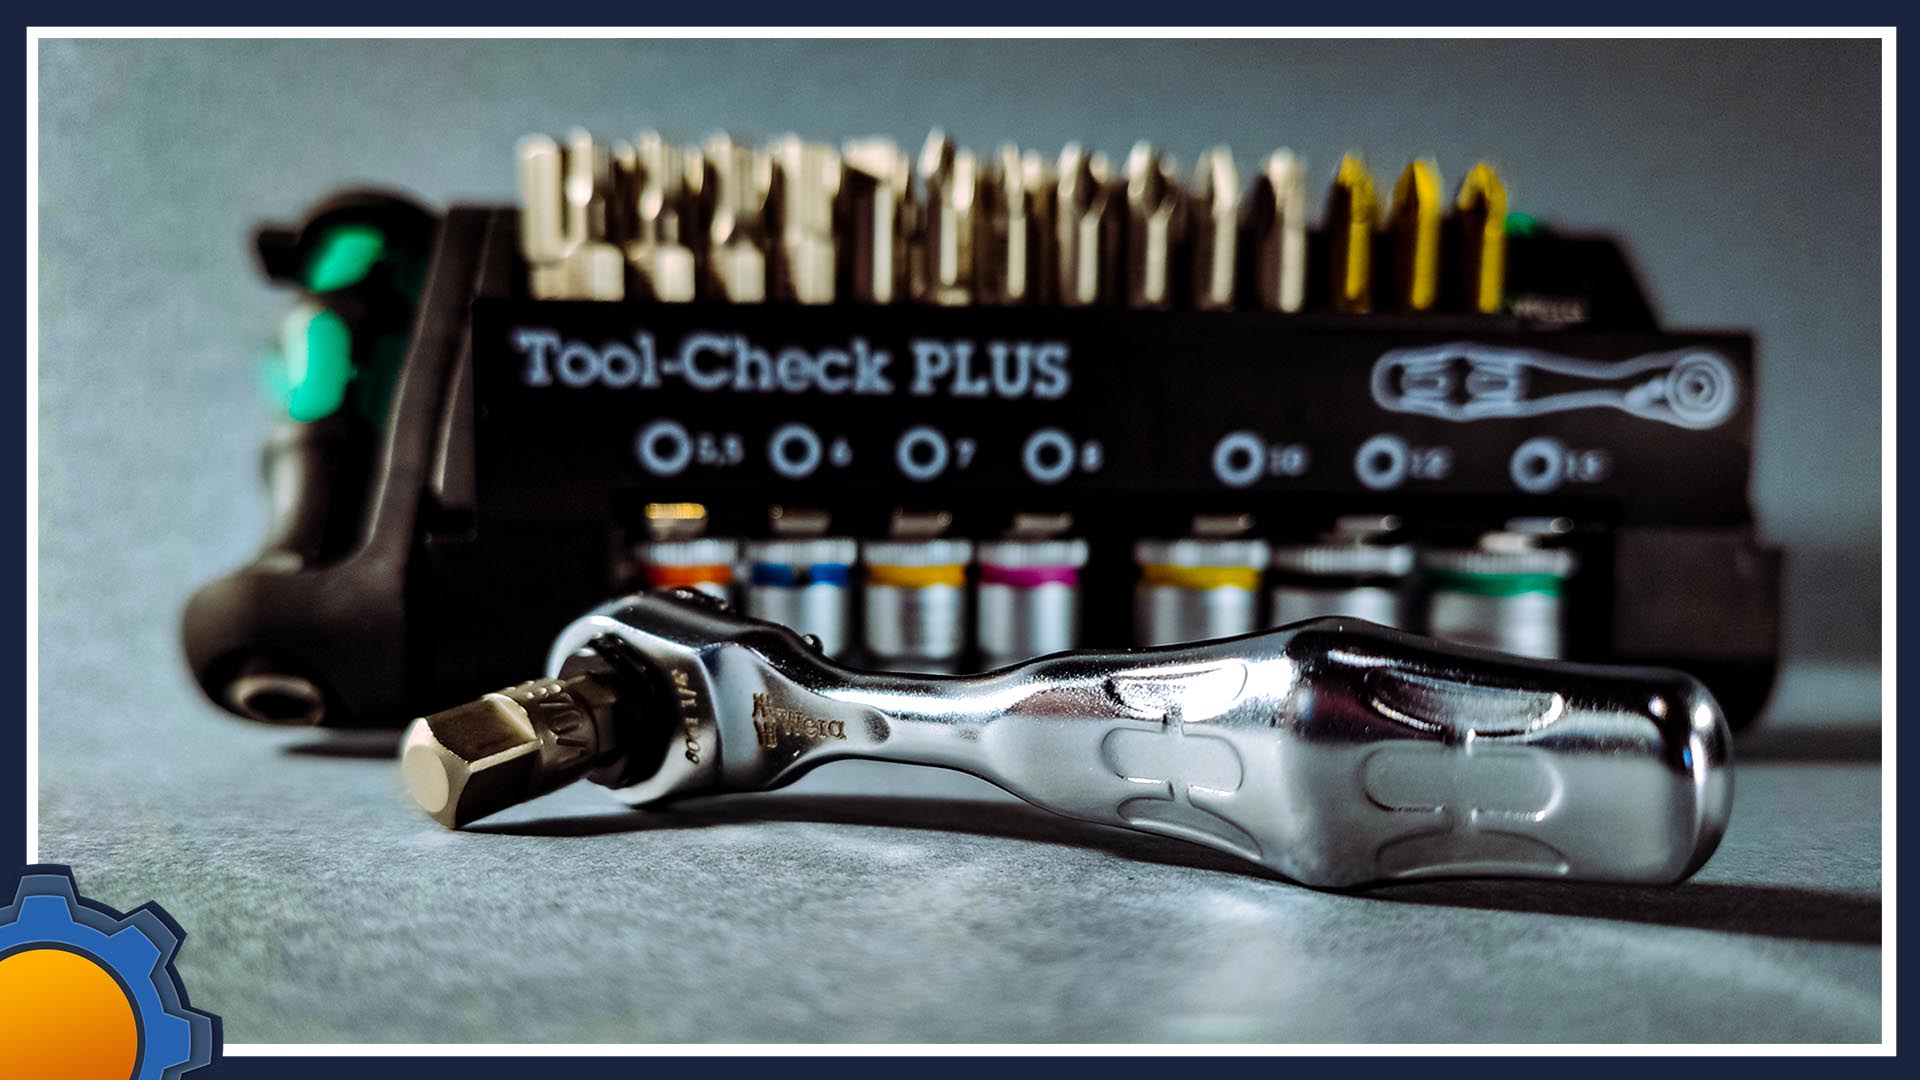 Oh, that's handy - Wera Tool-Check PLUS - NotEnoughTech